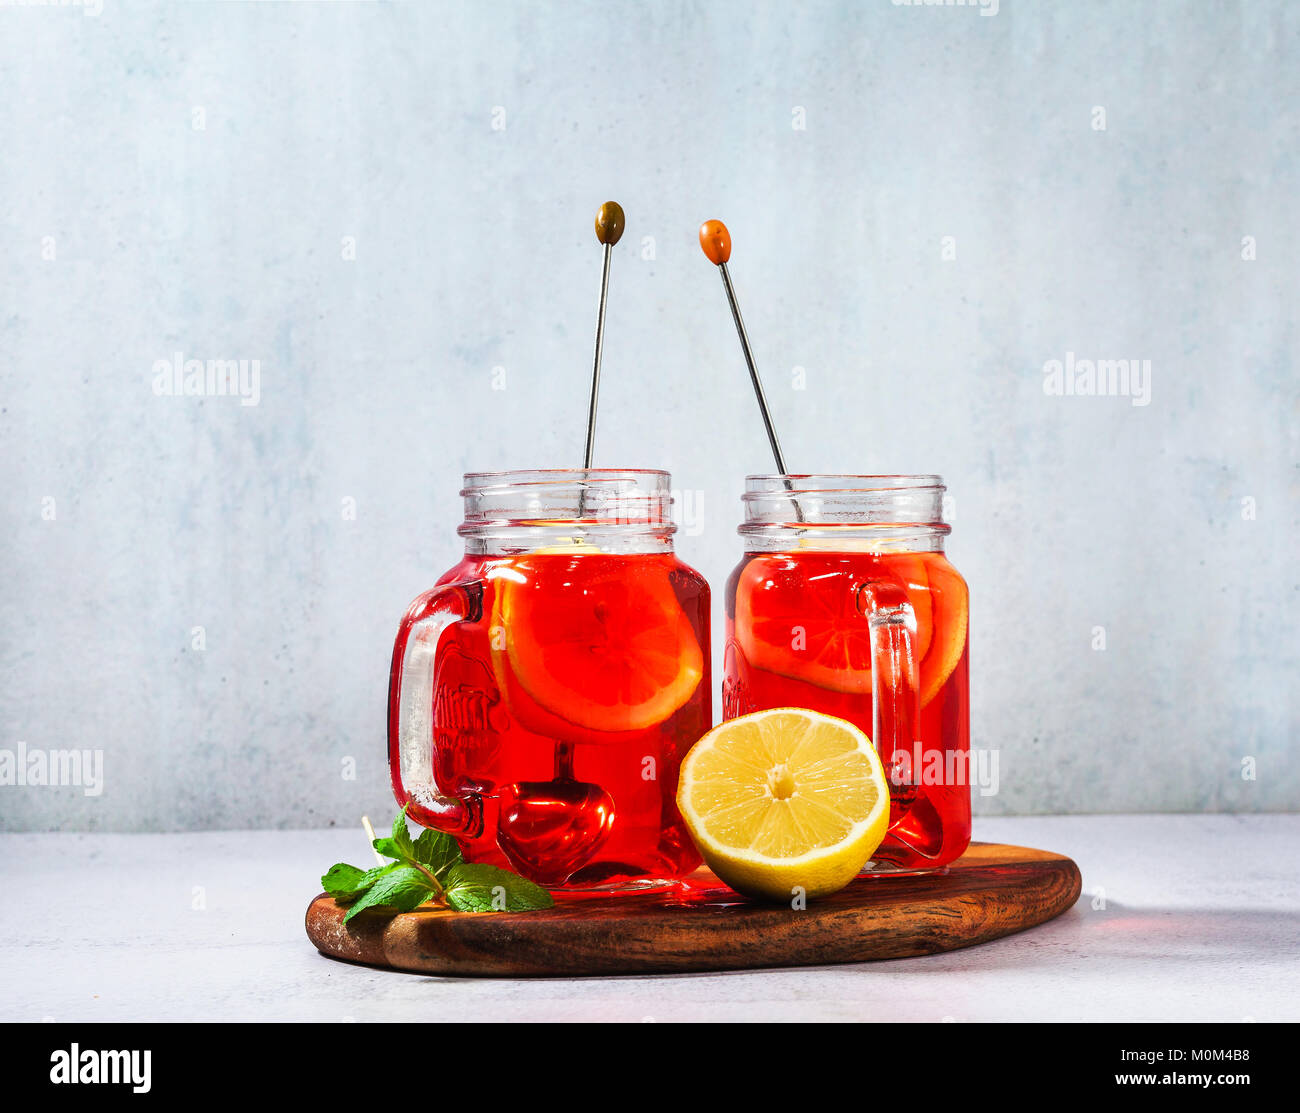 chilled karkade tea with lemon on a wooden stand on a stone table and background. antioxidants, spasmolytic, diuretic, antipyretic properties. Stock Photo